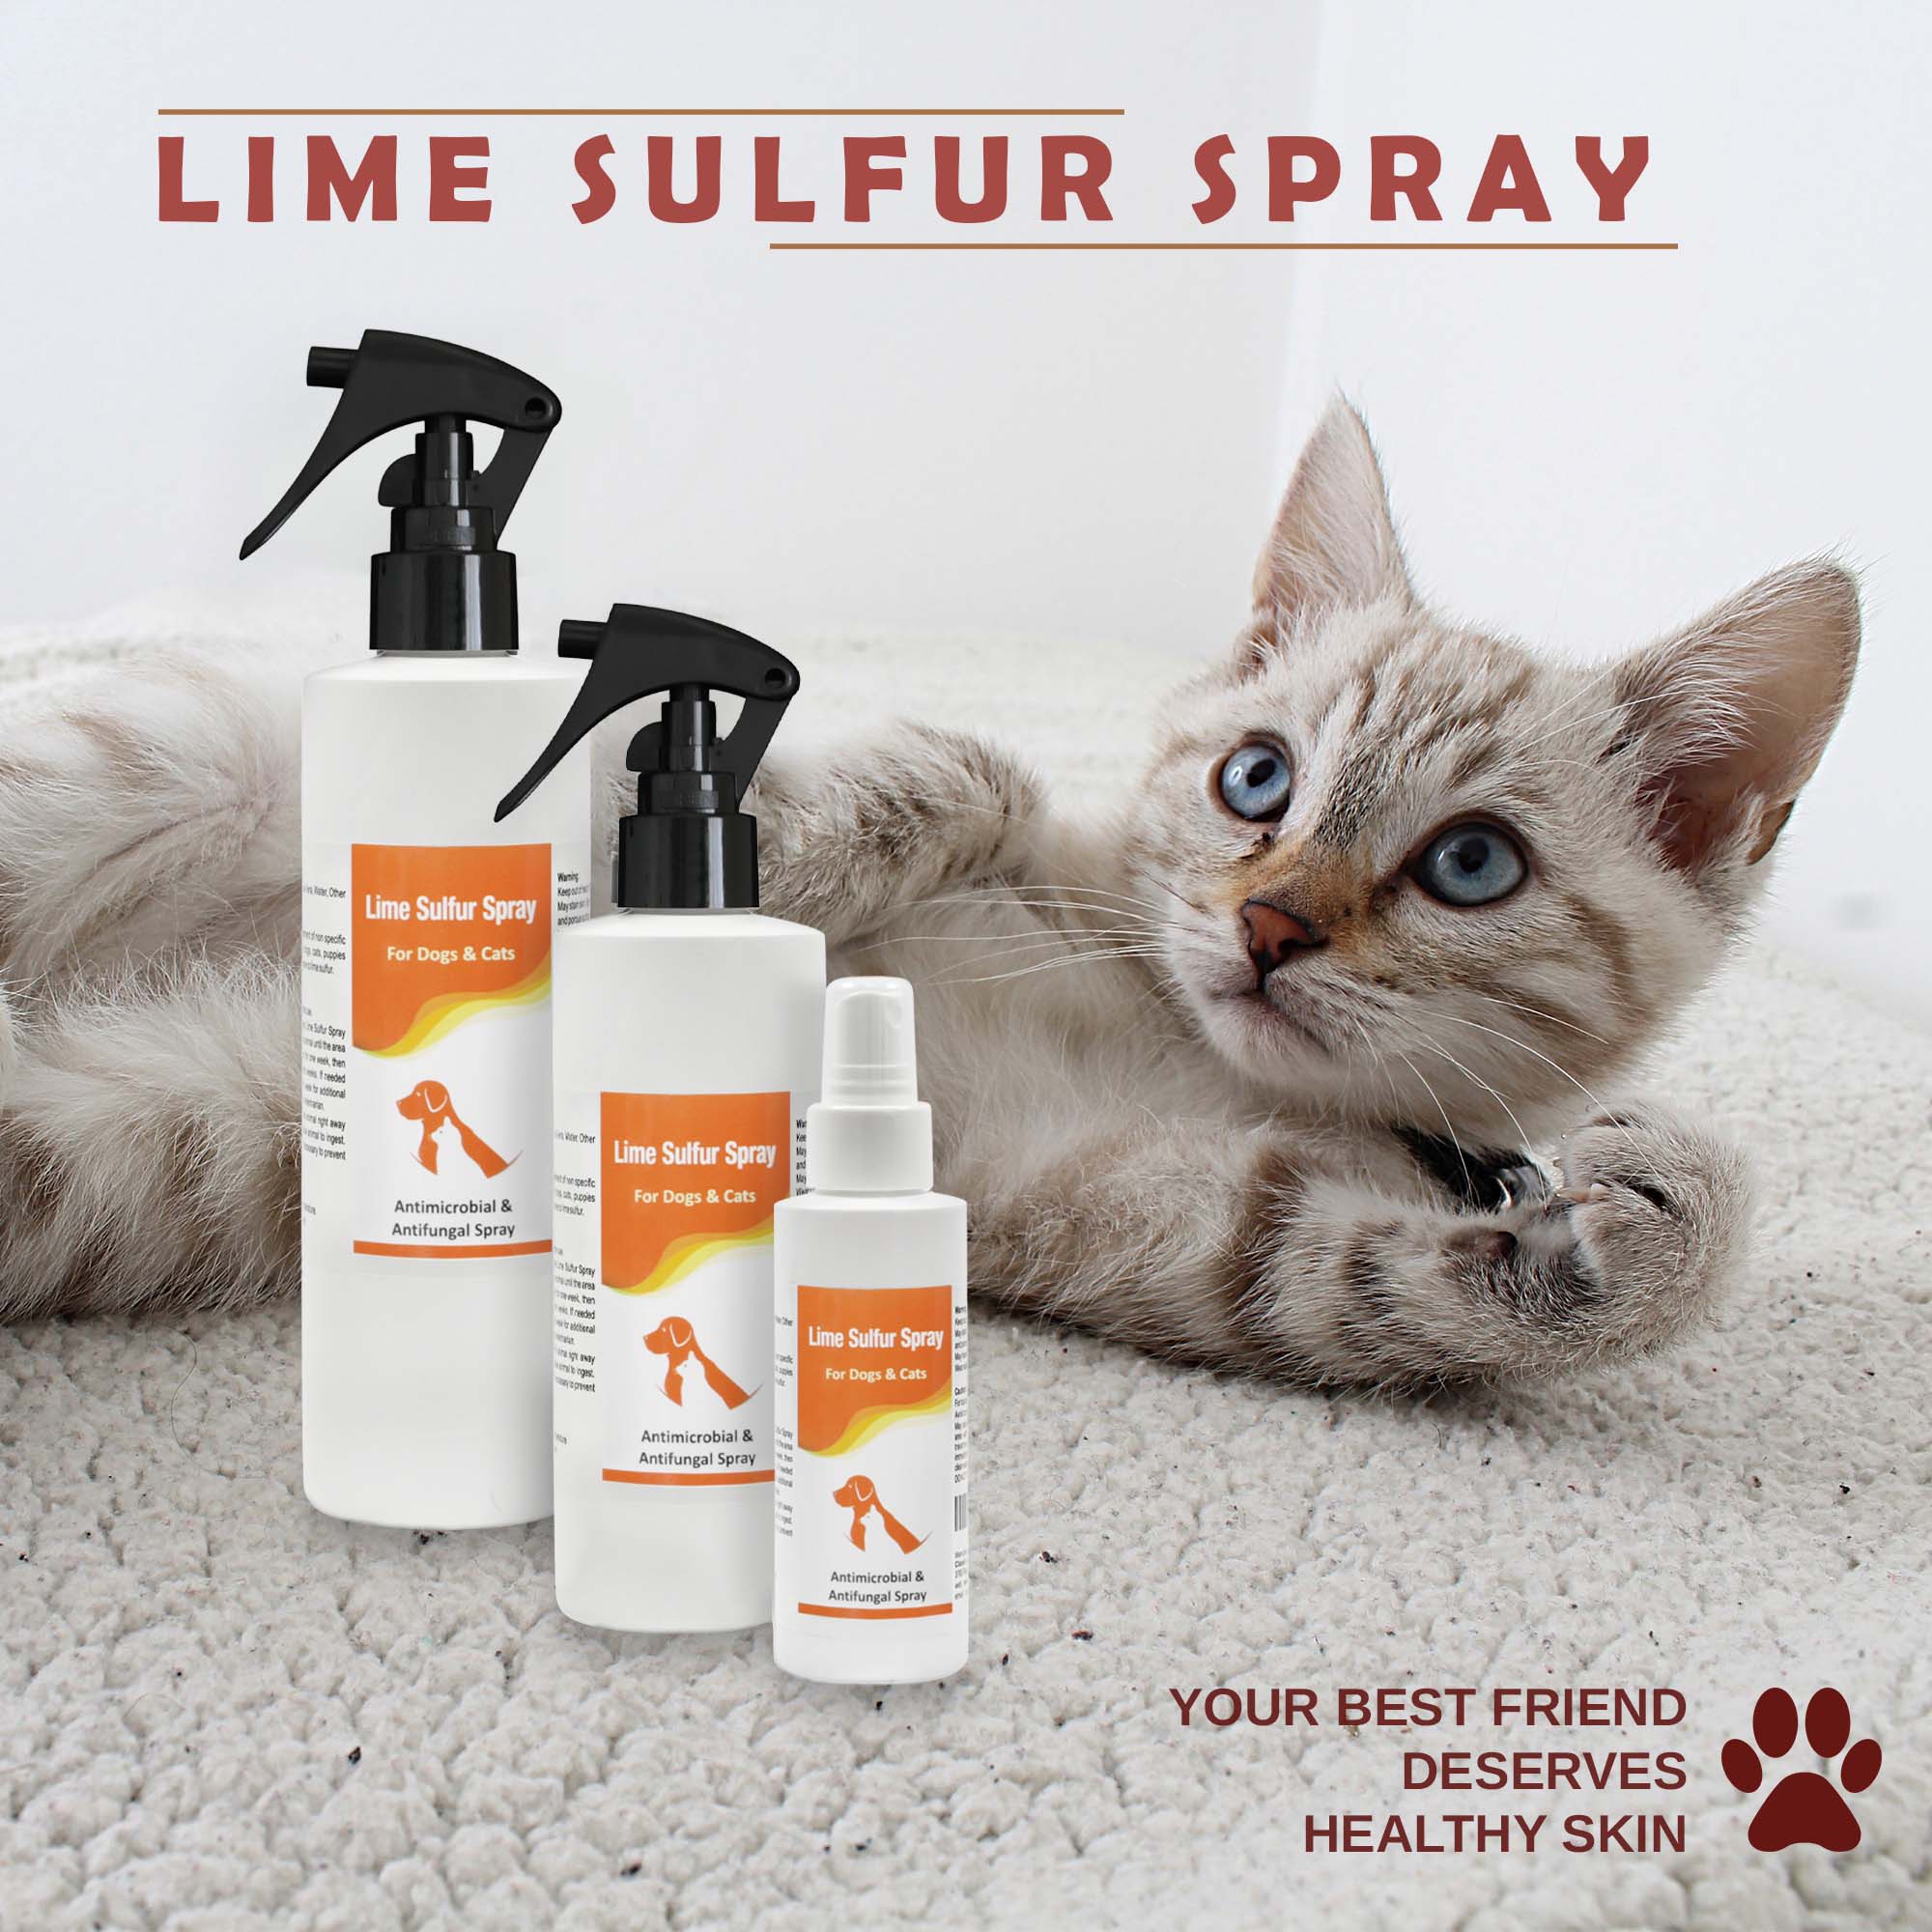 Lime Sulfur Spray | Lime Sulfur Spray for Dogs  | Healthy Paw Life